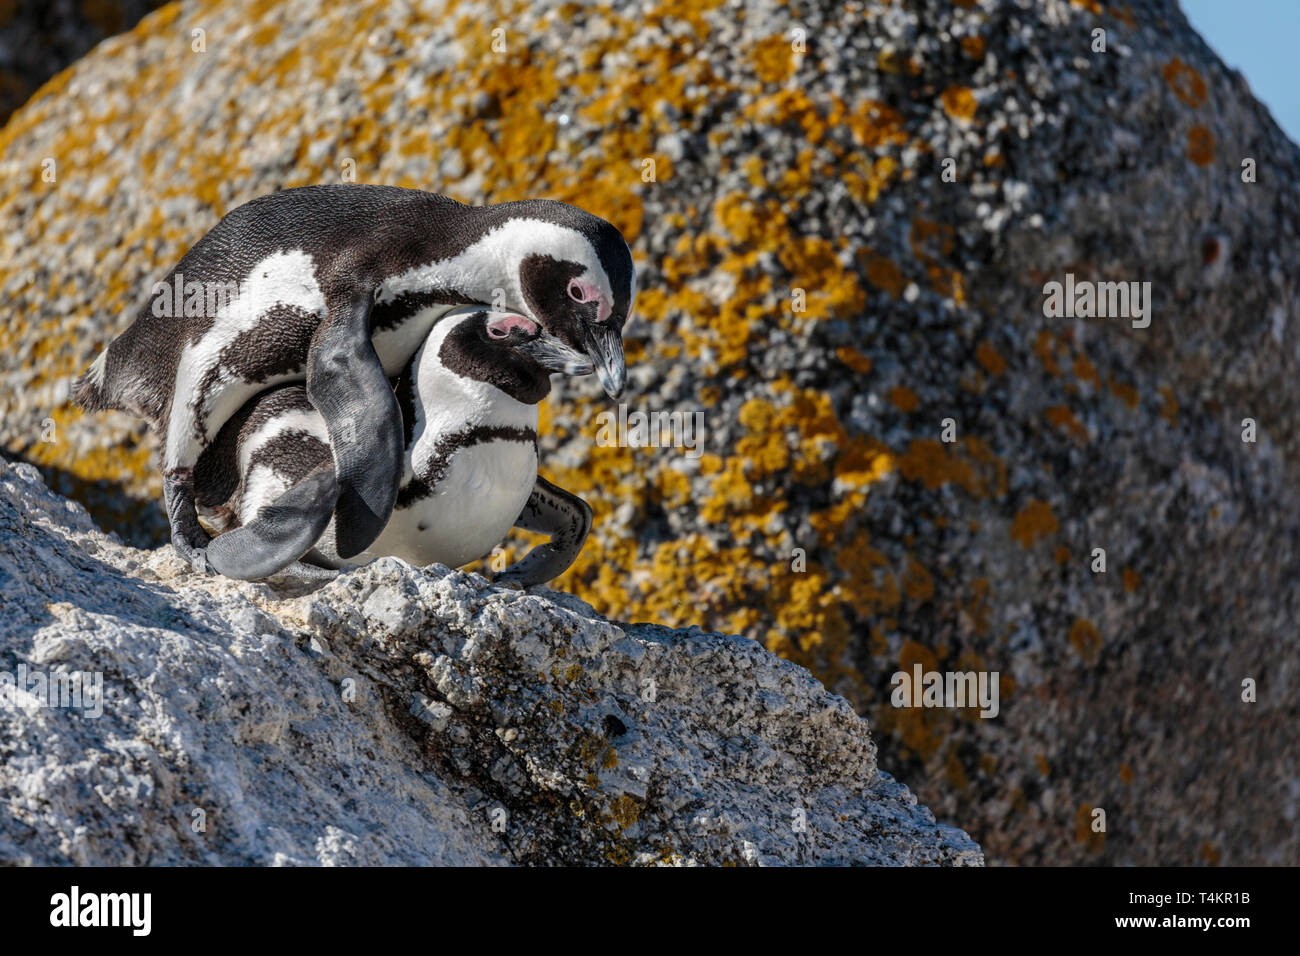 Two African penguins, Spheniscus demersus, on a rock mating, at Simonstown, South Africa Stock Photo